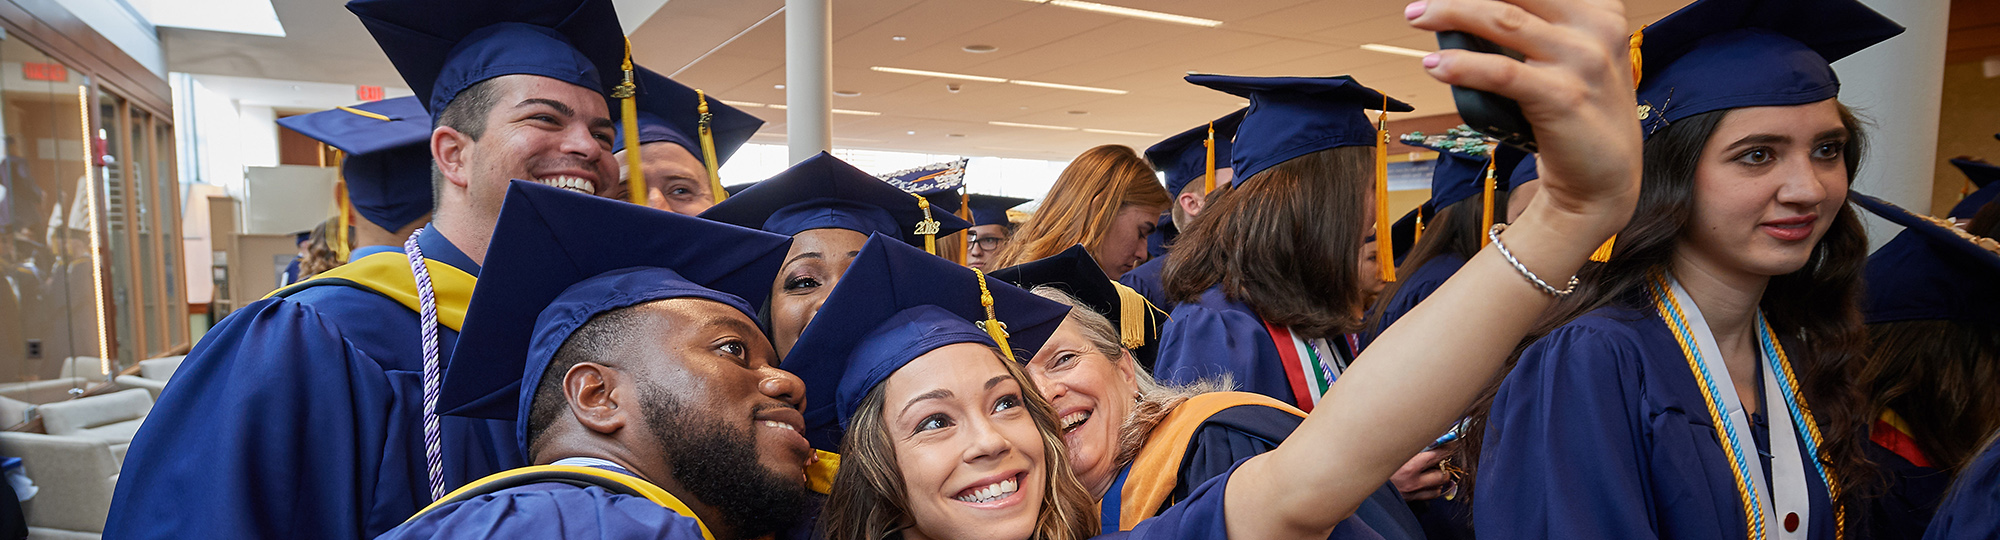 Students dressed in graduation robes take a selfie